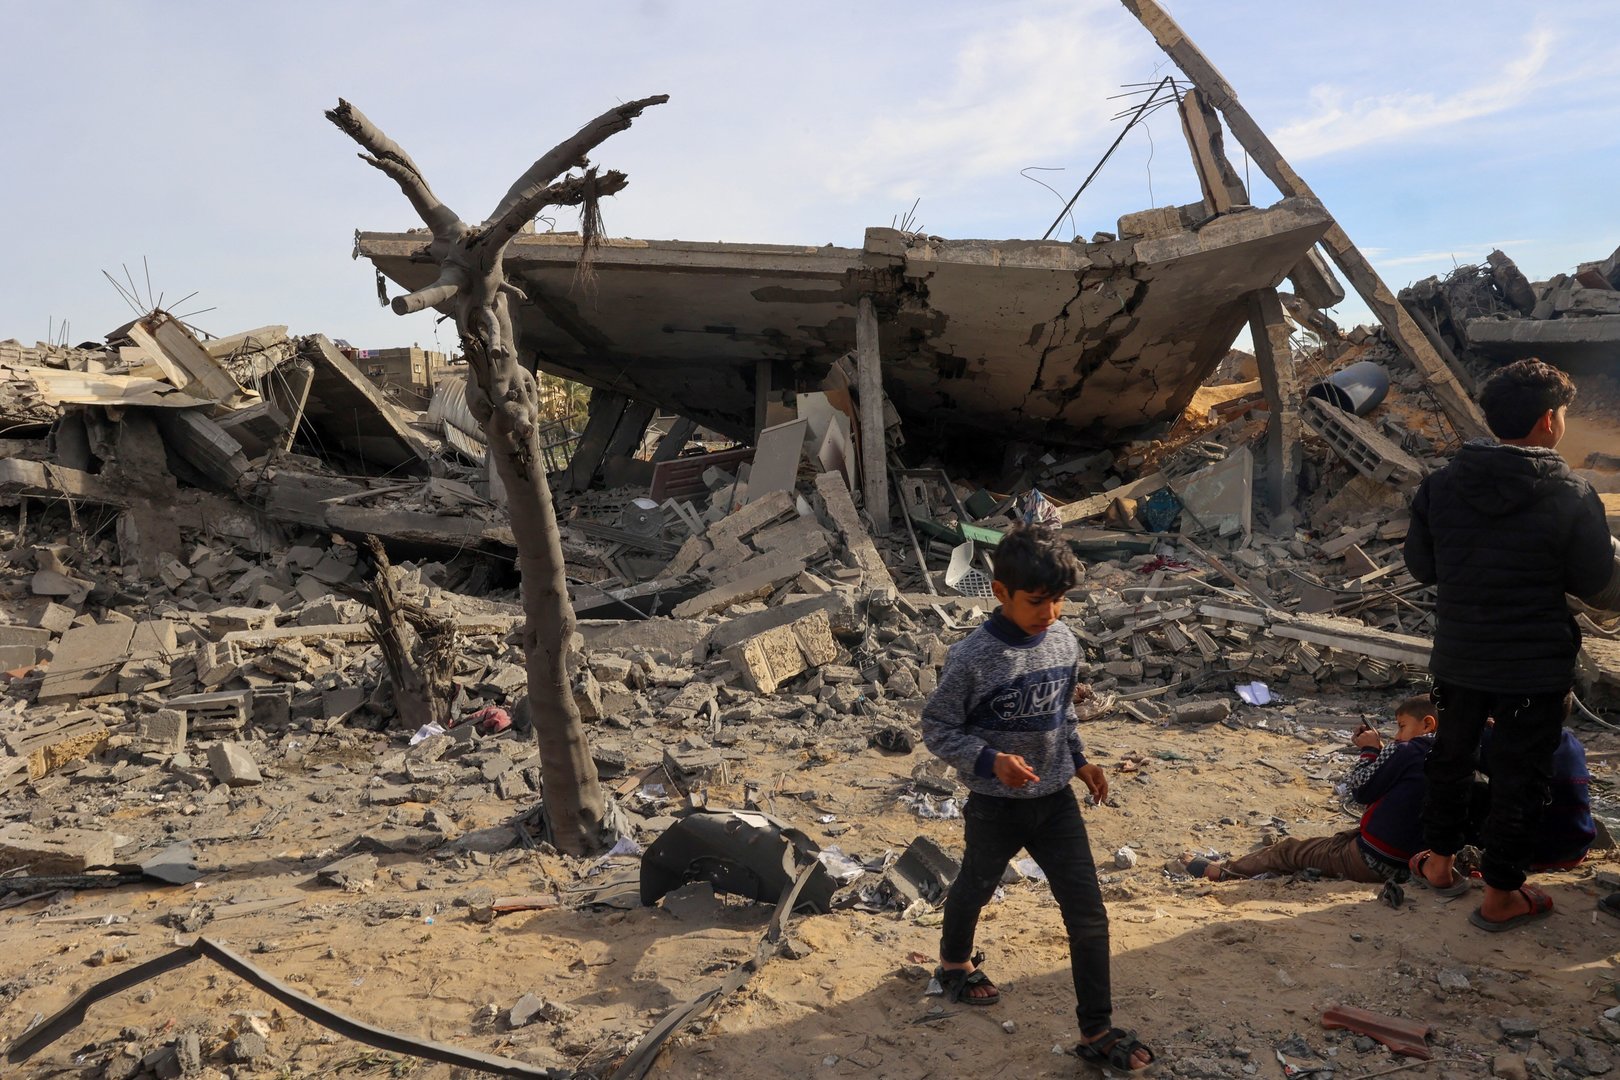 UK Calls for Israel to Reconsider Actions in Gaza